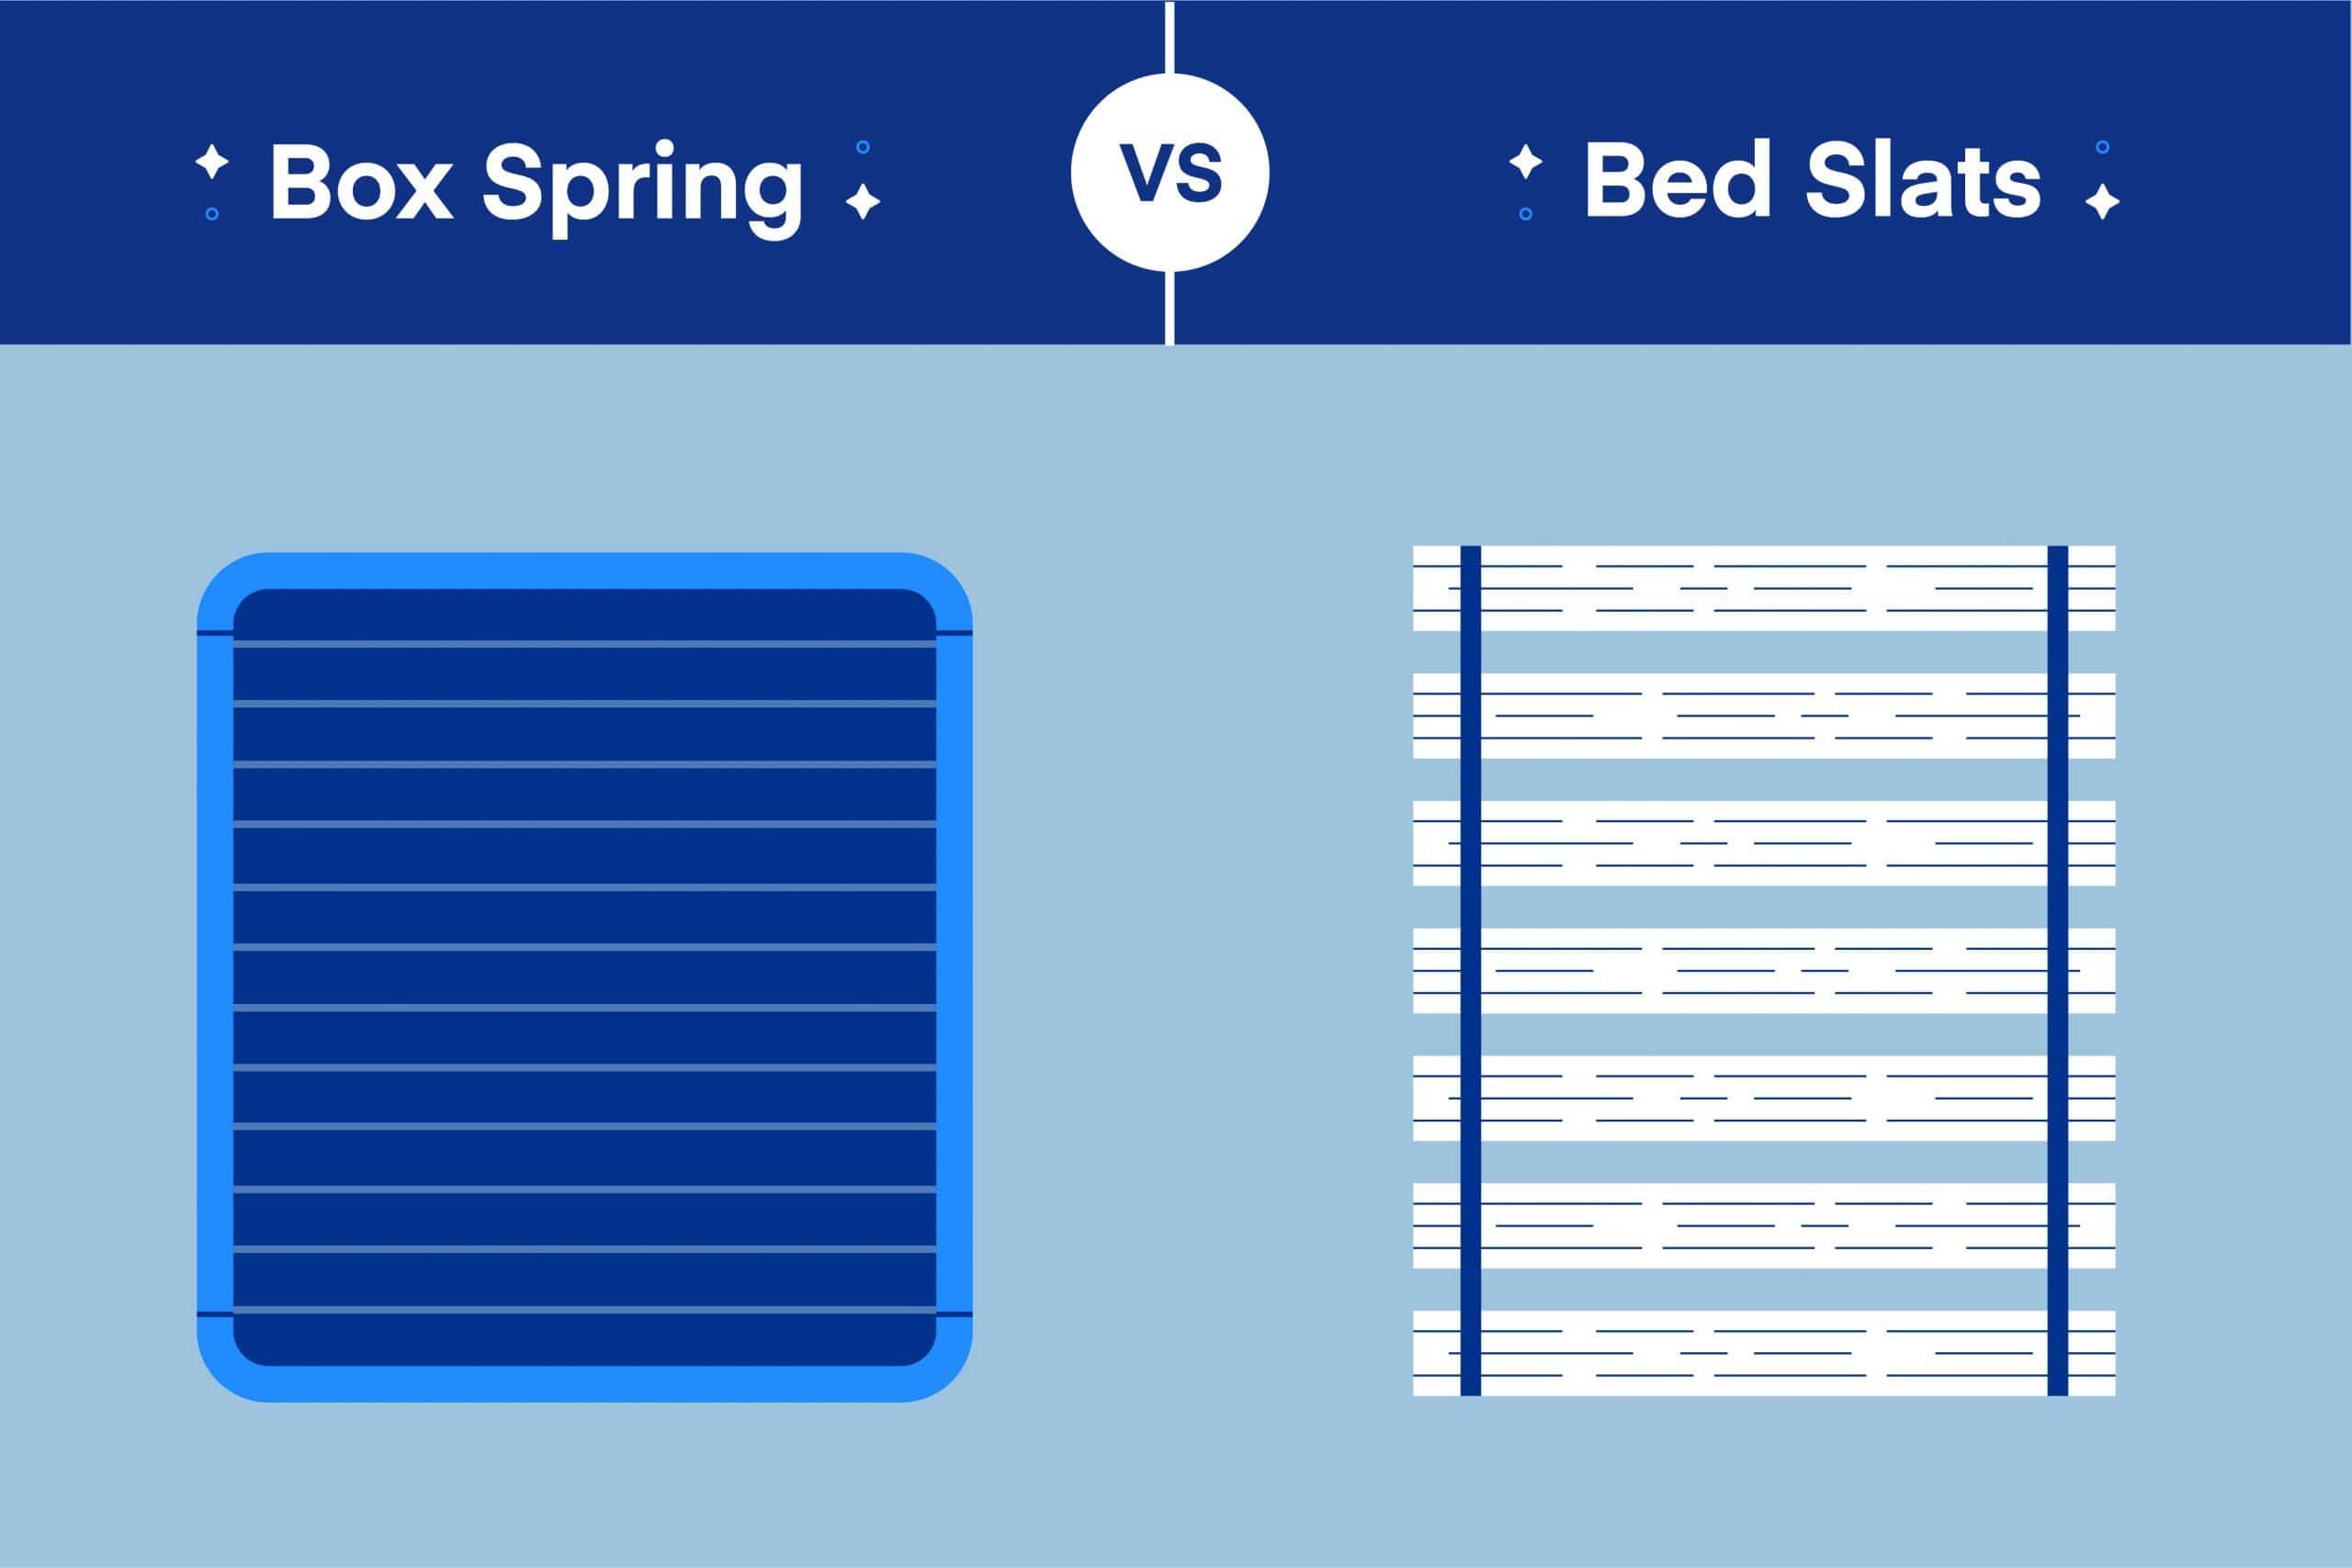 Bed Slats vs Box Spring: Which Should You Use?